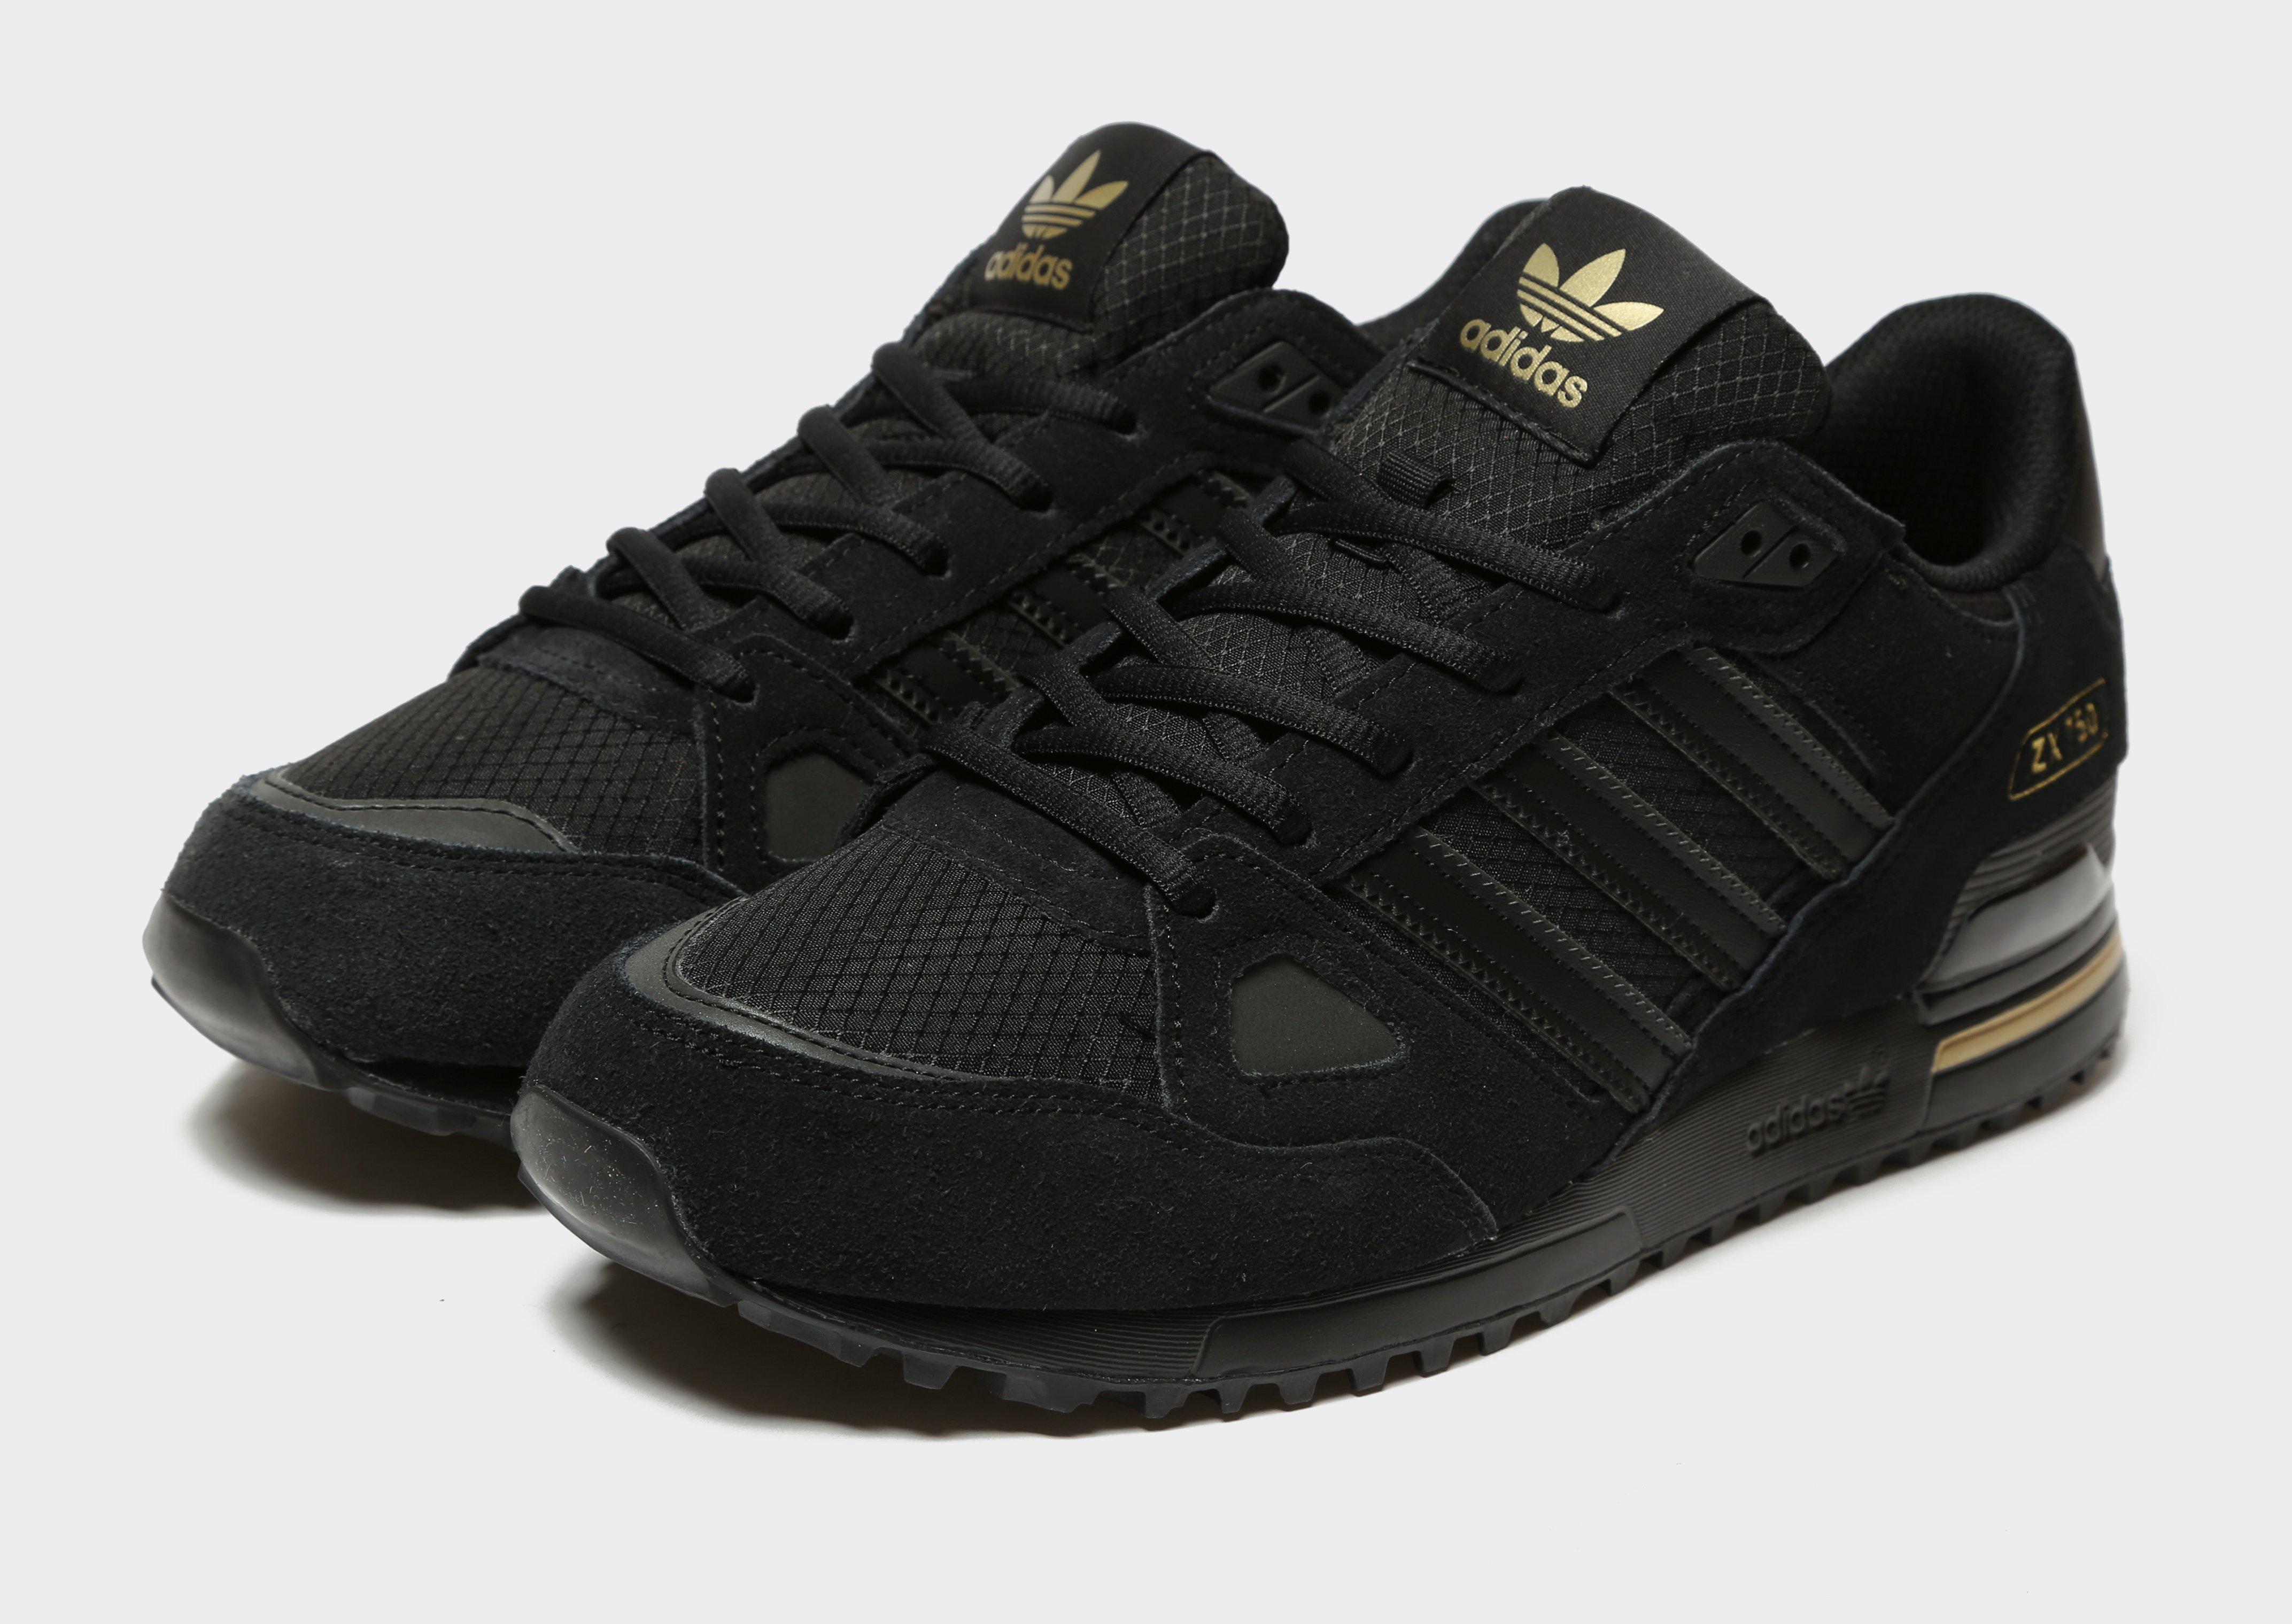 adidas zx black and gold